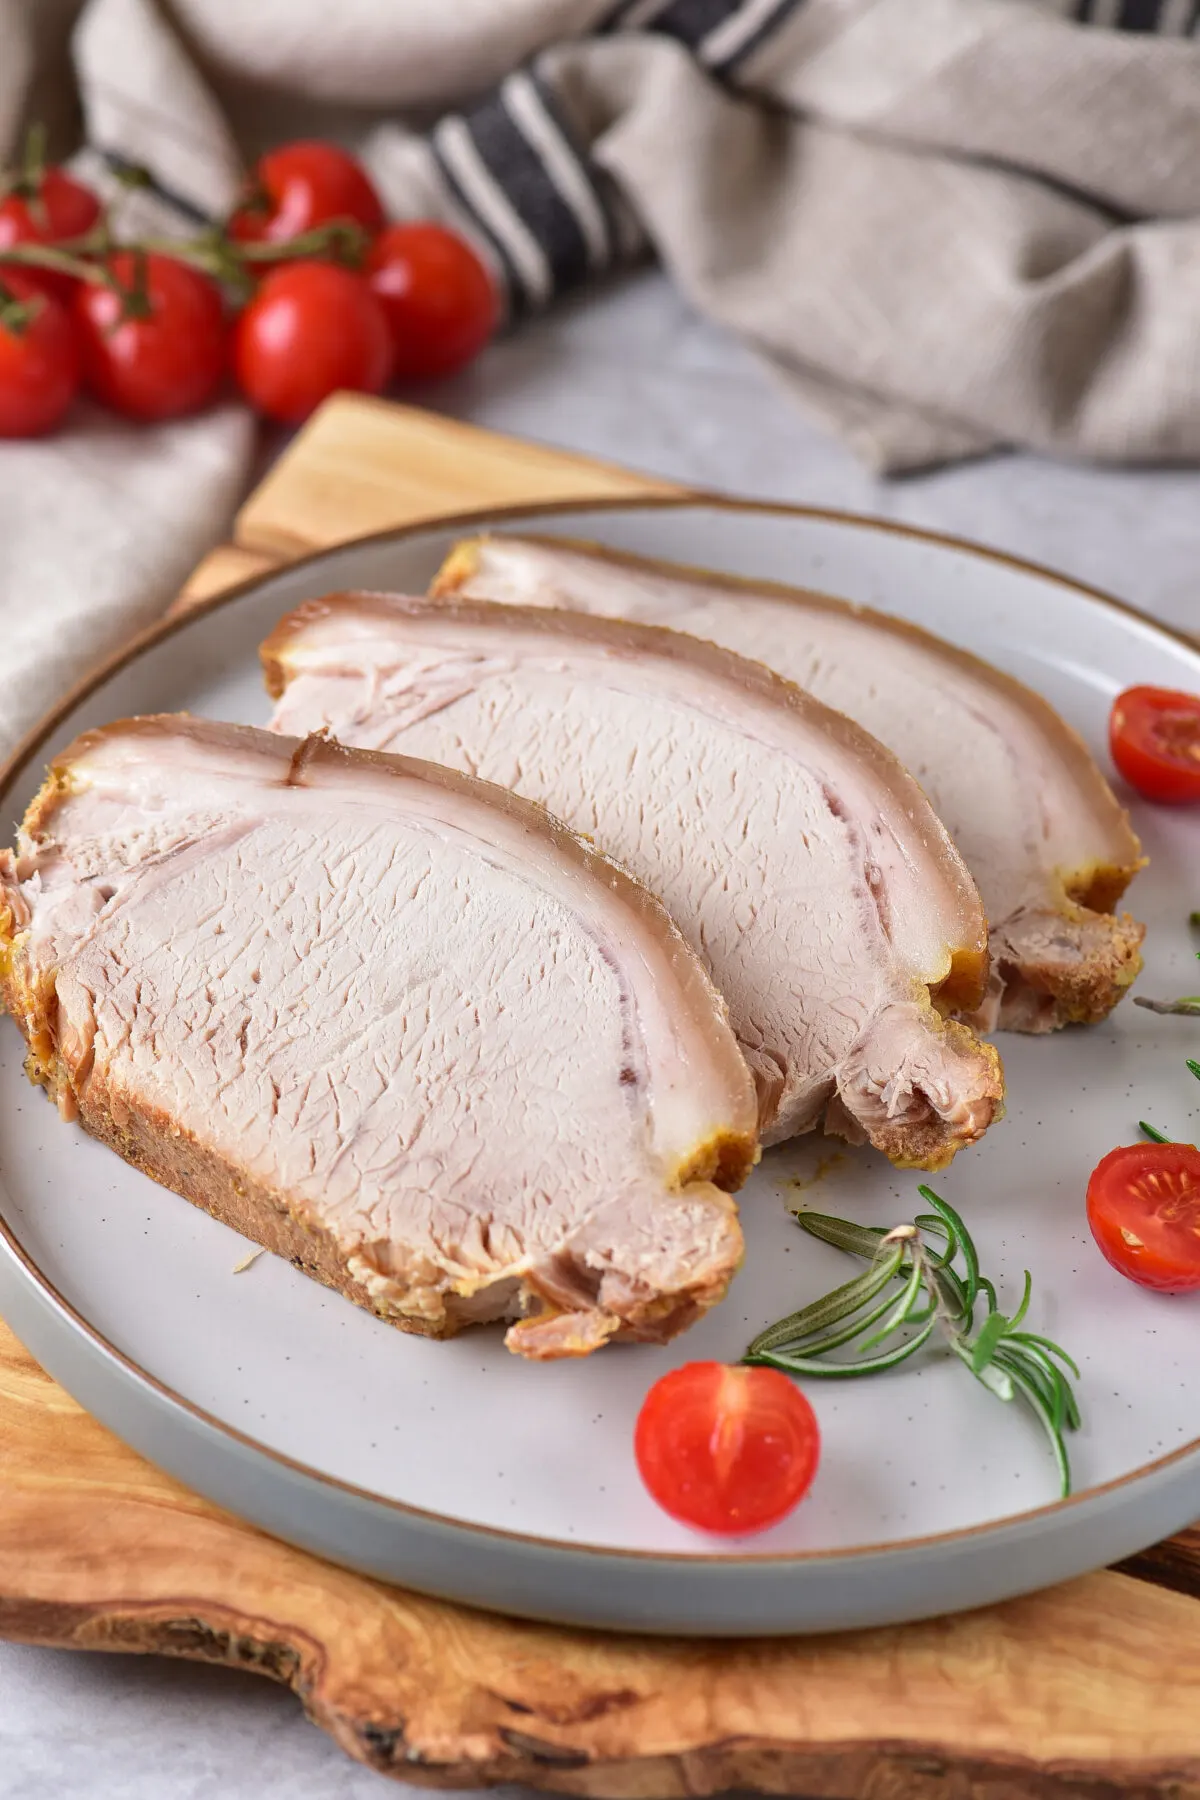 Looking for a delicious and easy pork recipe? This honey mustard pork loin recipe is perfect for any night of the week!